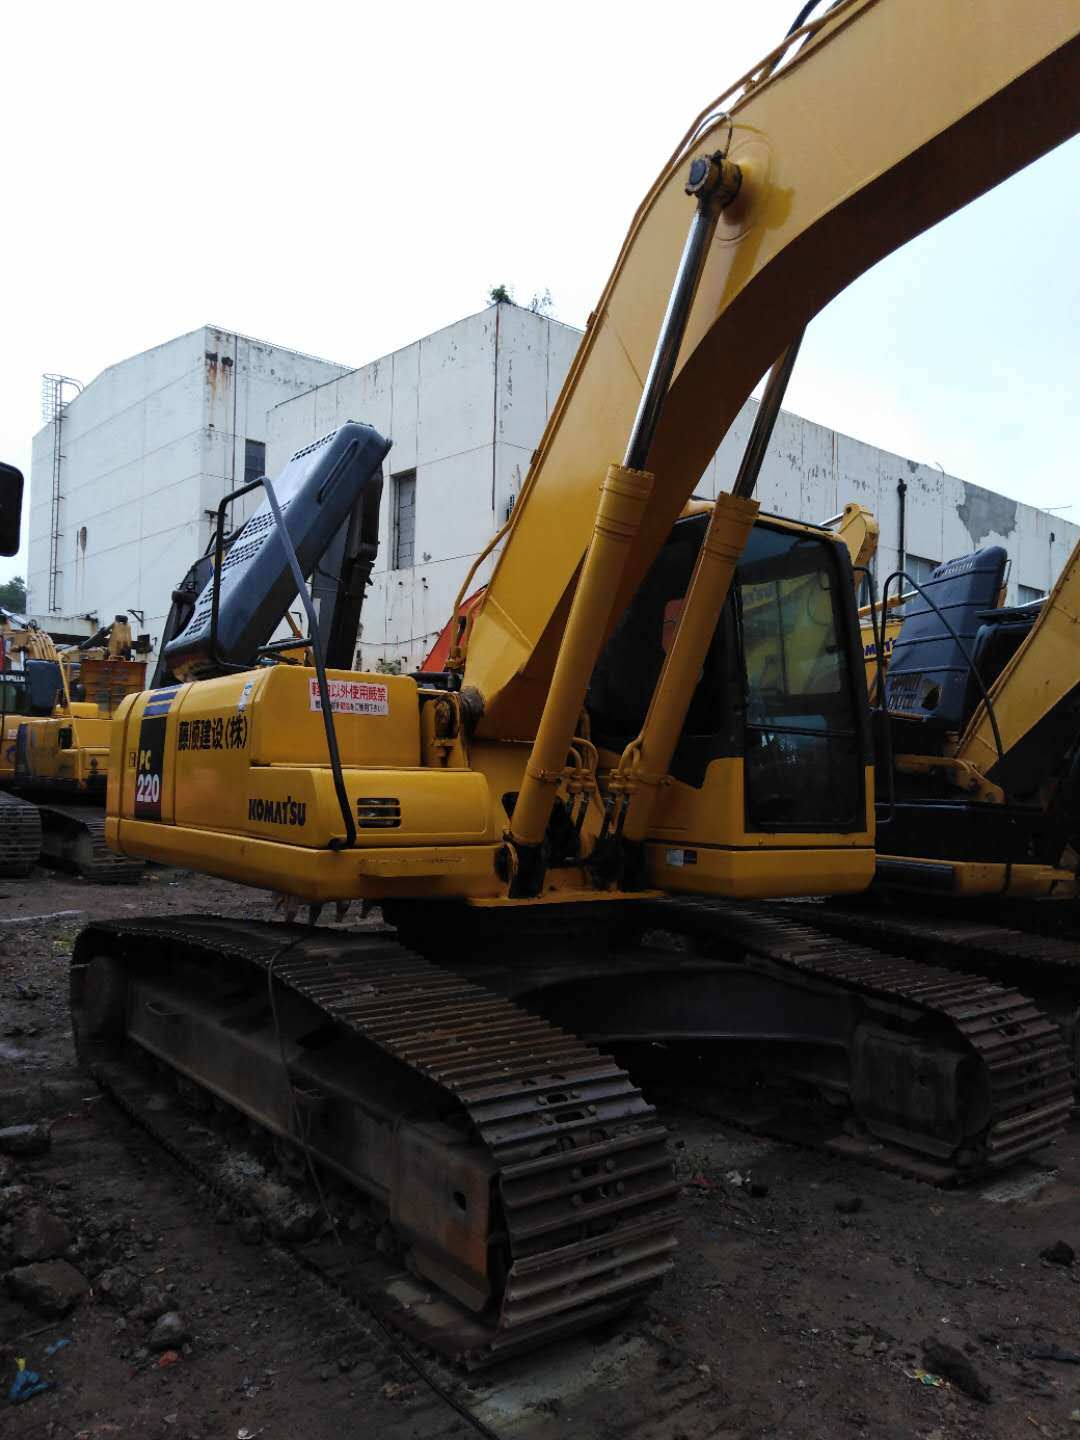 
                Original Used/Secondhand Komatsu PC220-7 Excavator with Good Condition for Sale
            